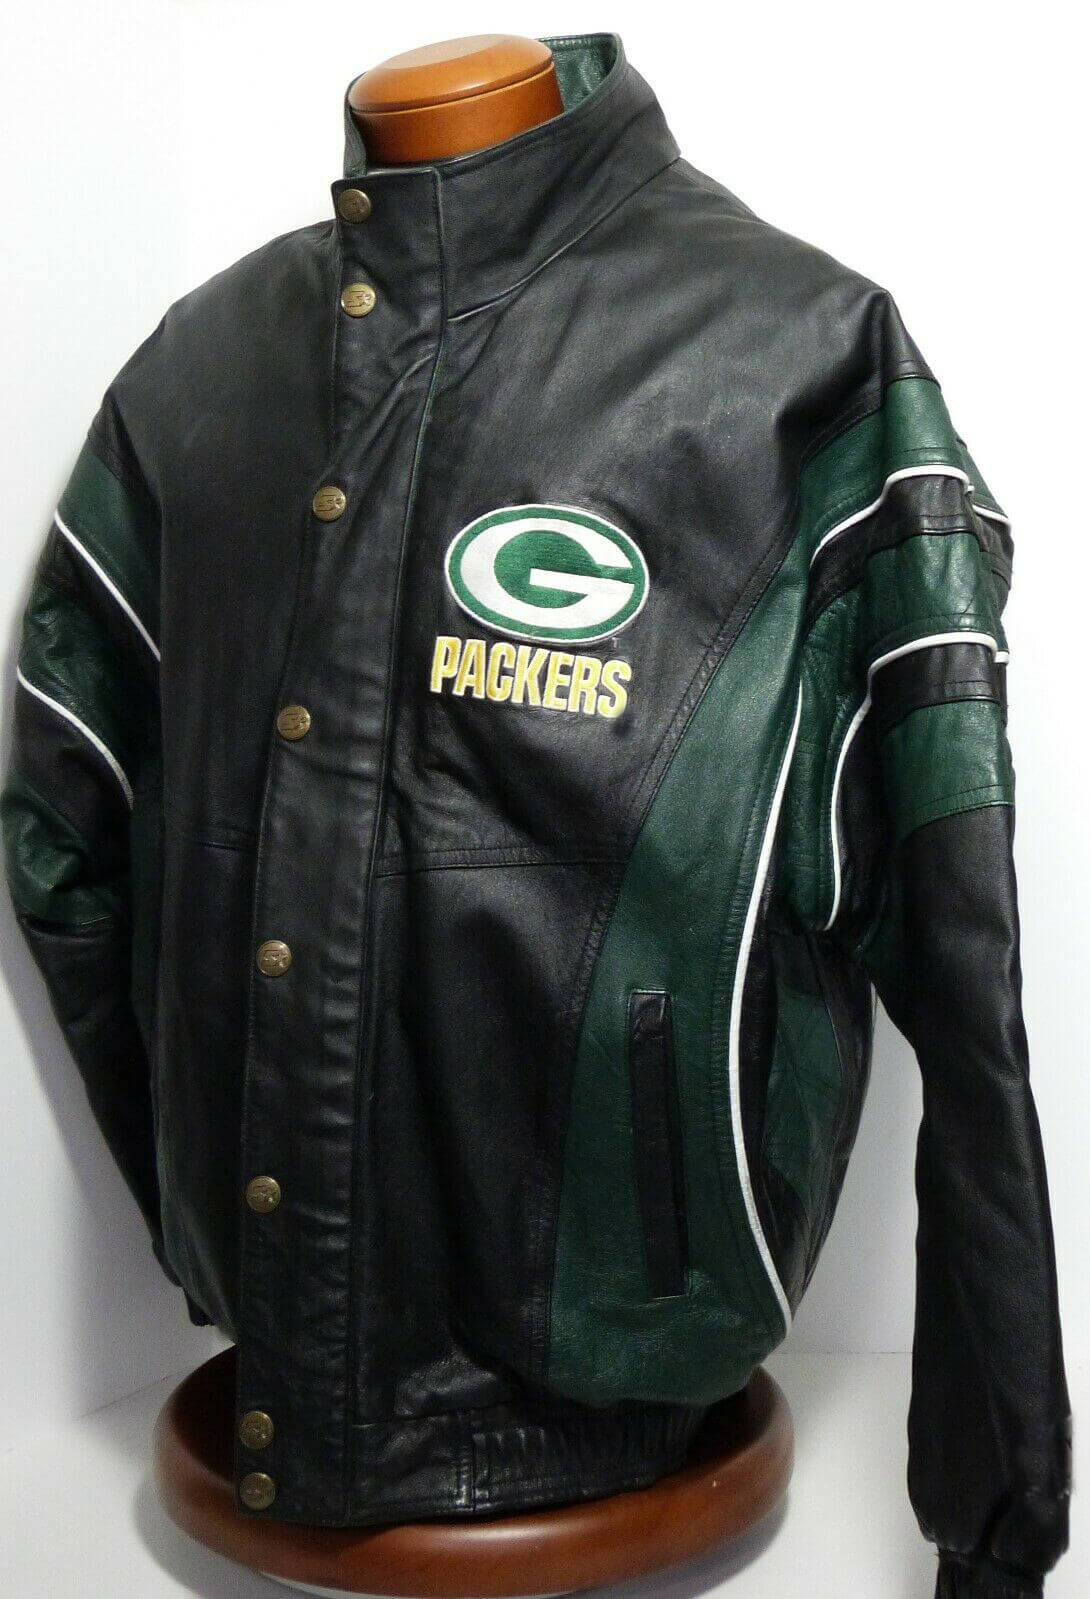 1990's NFL Pro Line Green Bay Packers Leather Jacket - Maker of Jacket